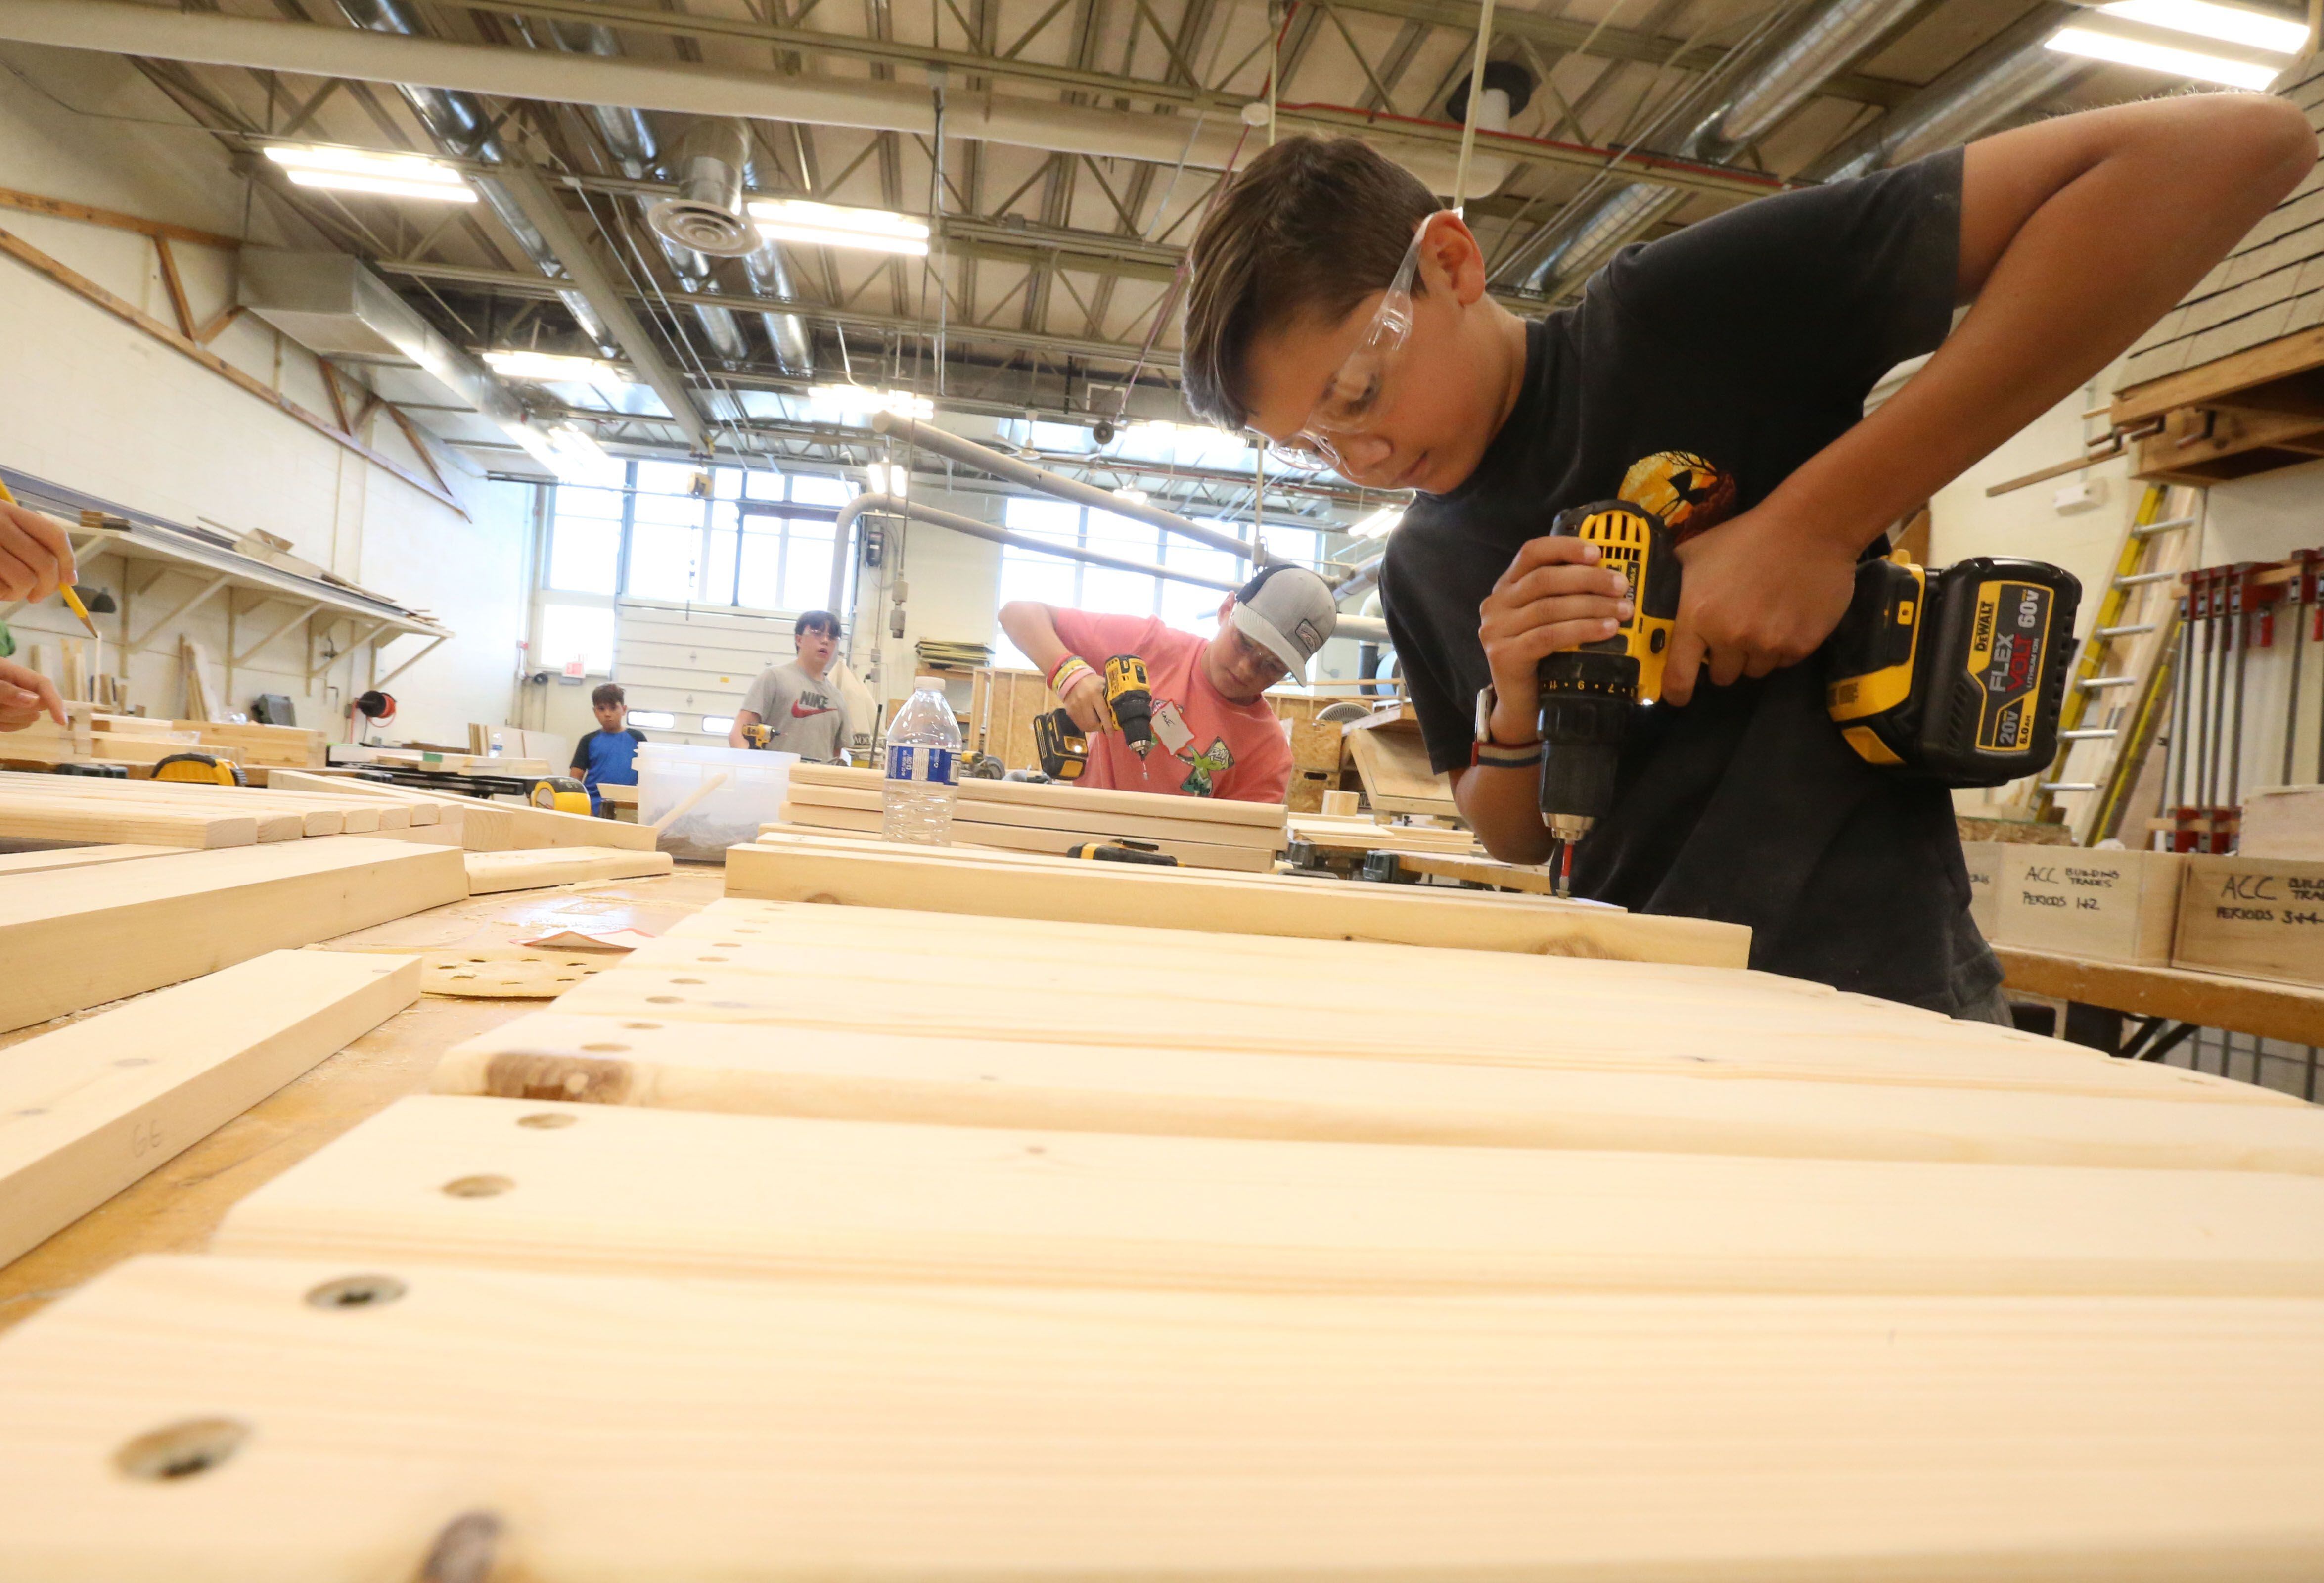 Students Cale Full and Geno Agrubright use drills to screw into boards while making a Adirondack chair during the Area Career Center's Summer Hands-On Showcase on Thursday, June 8, 2023, at La Salle-Peru High School.